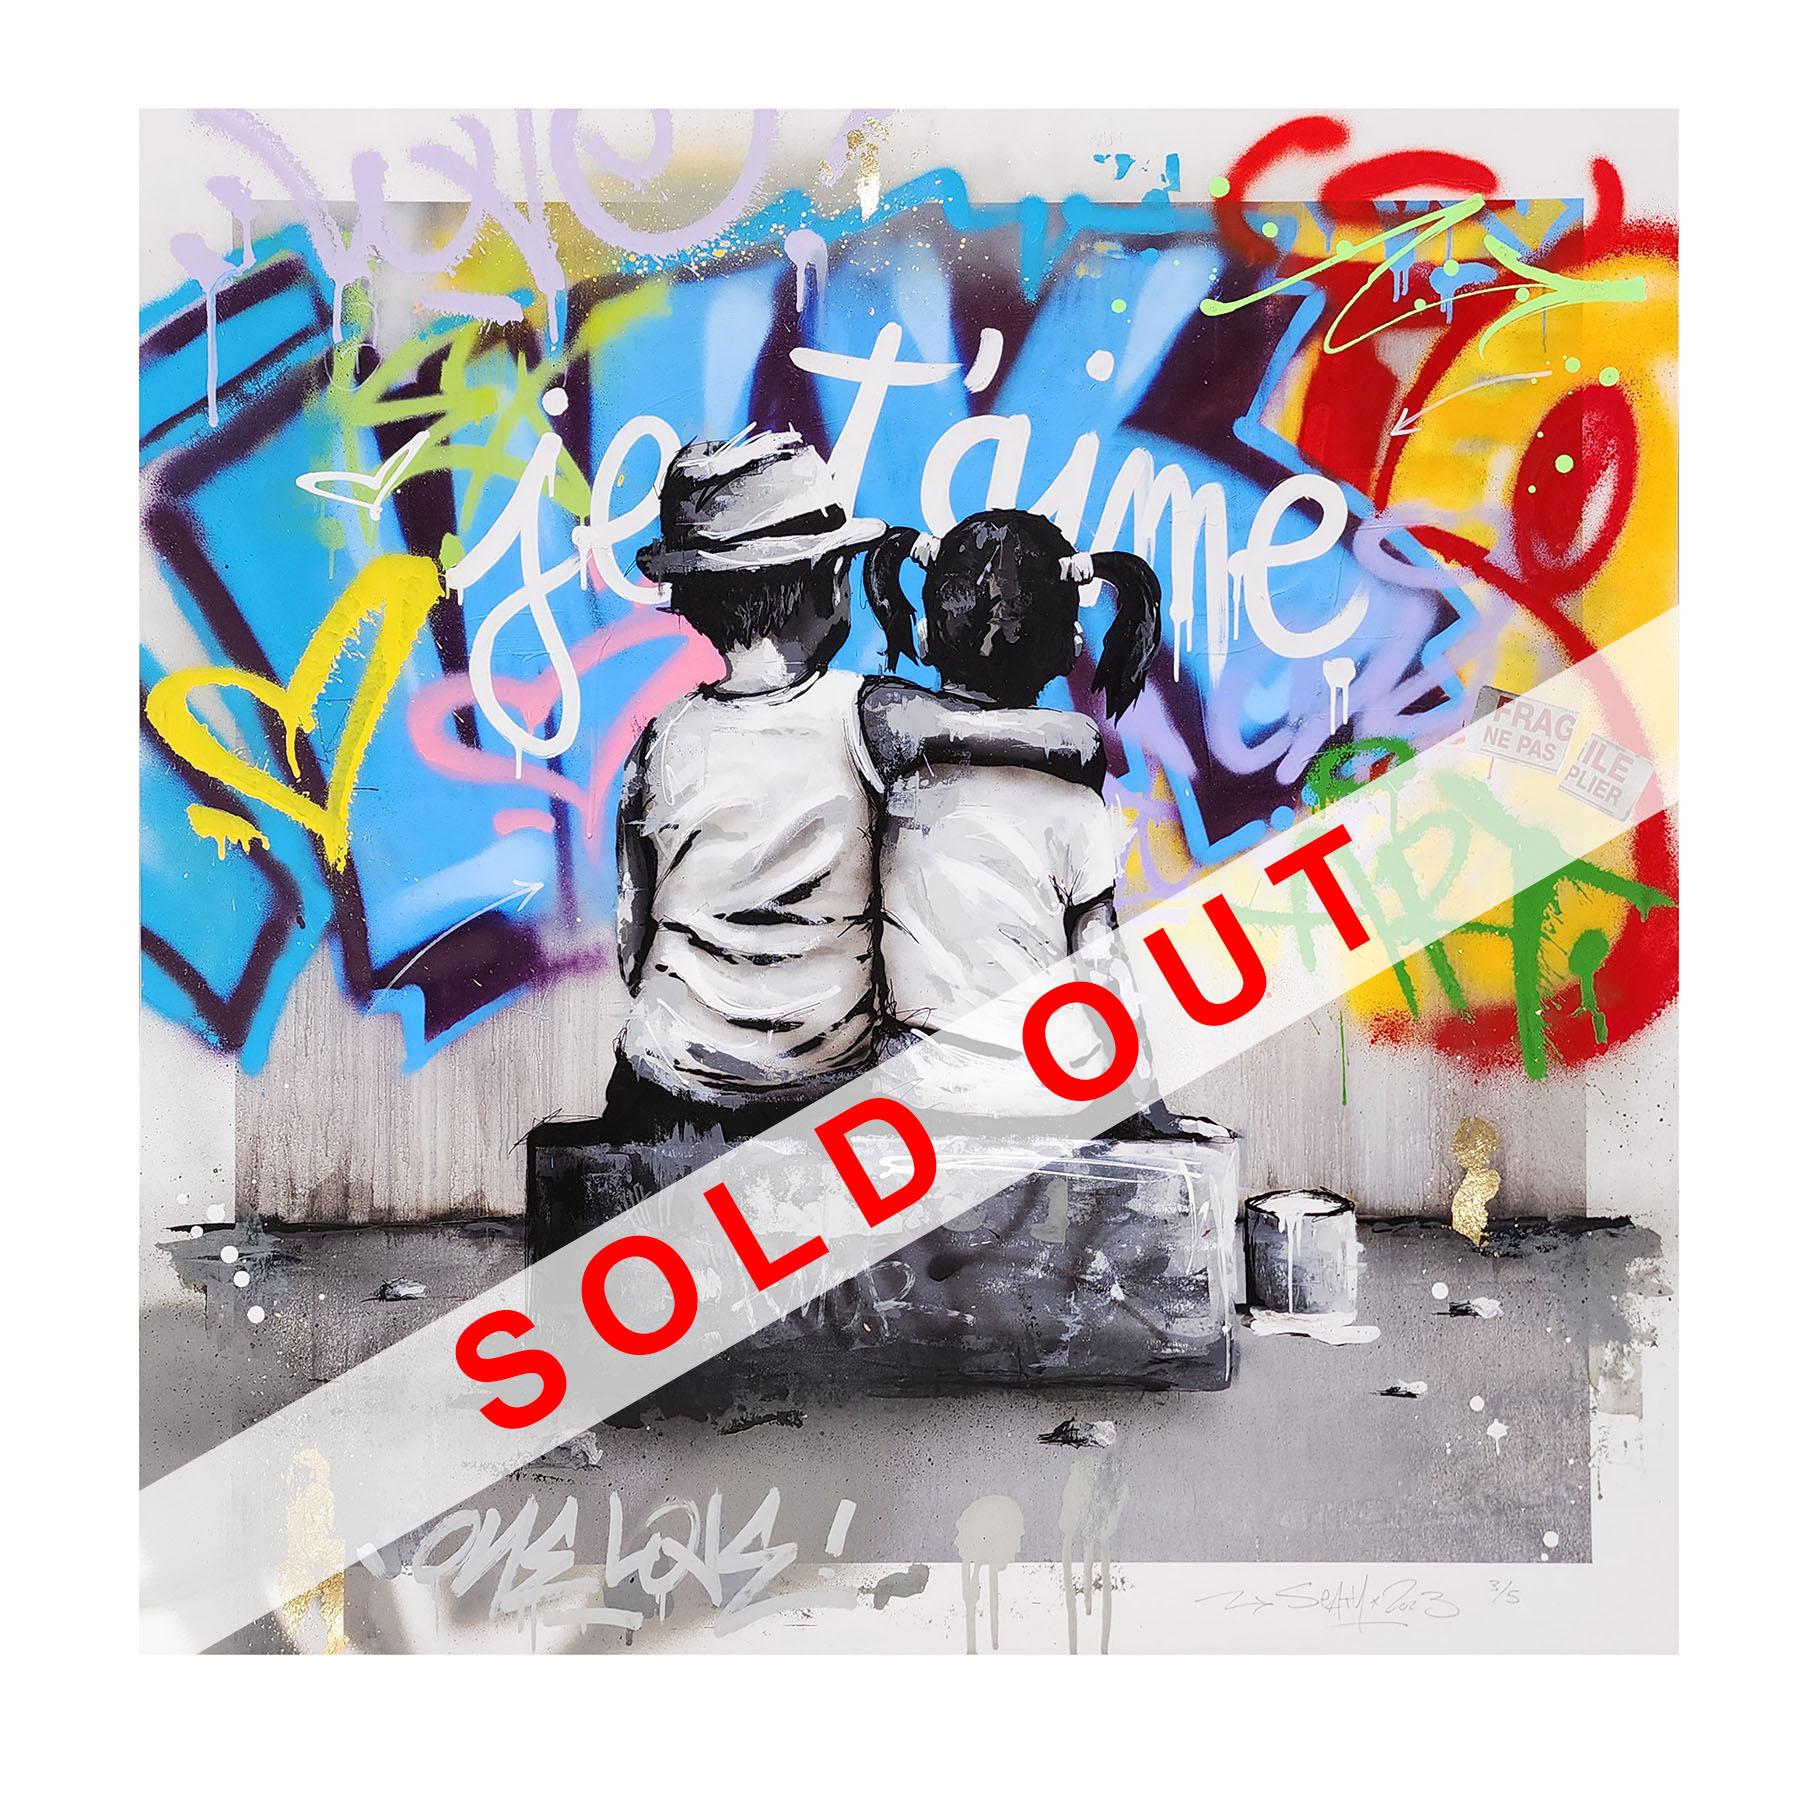 Sold out site re cupe re 